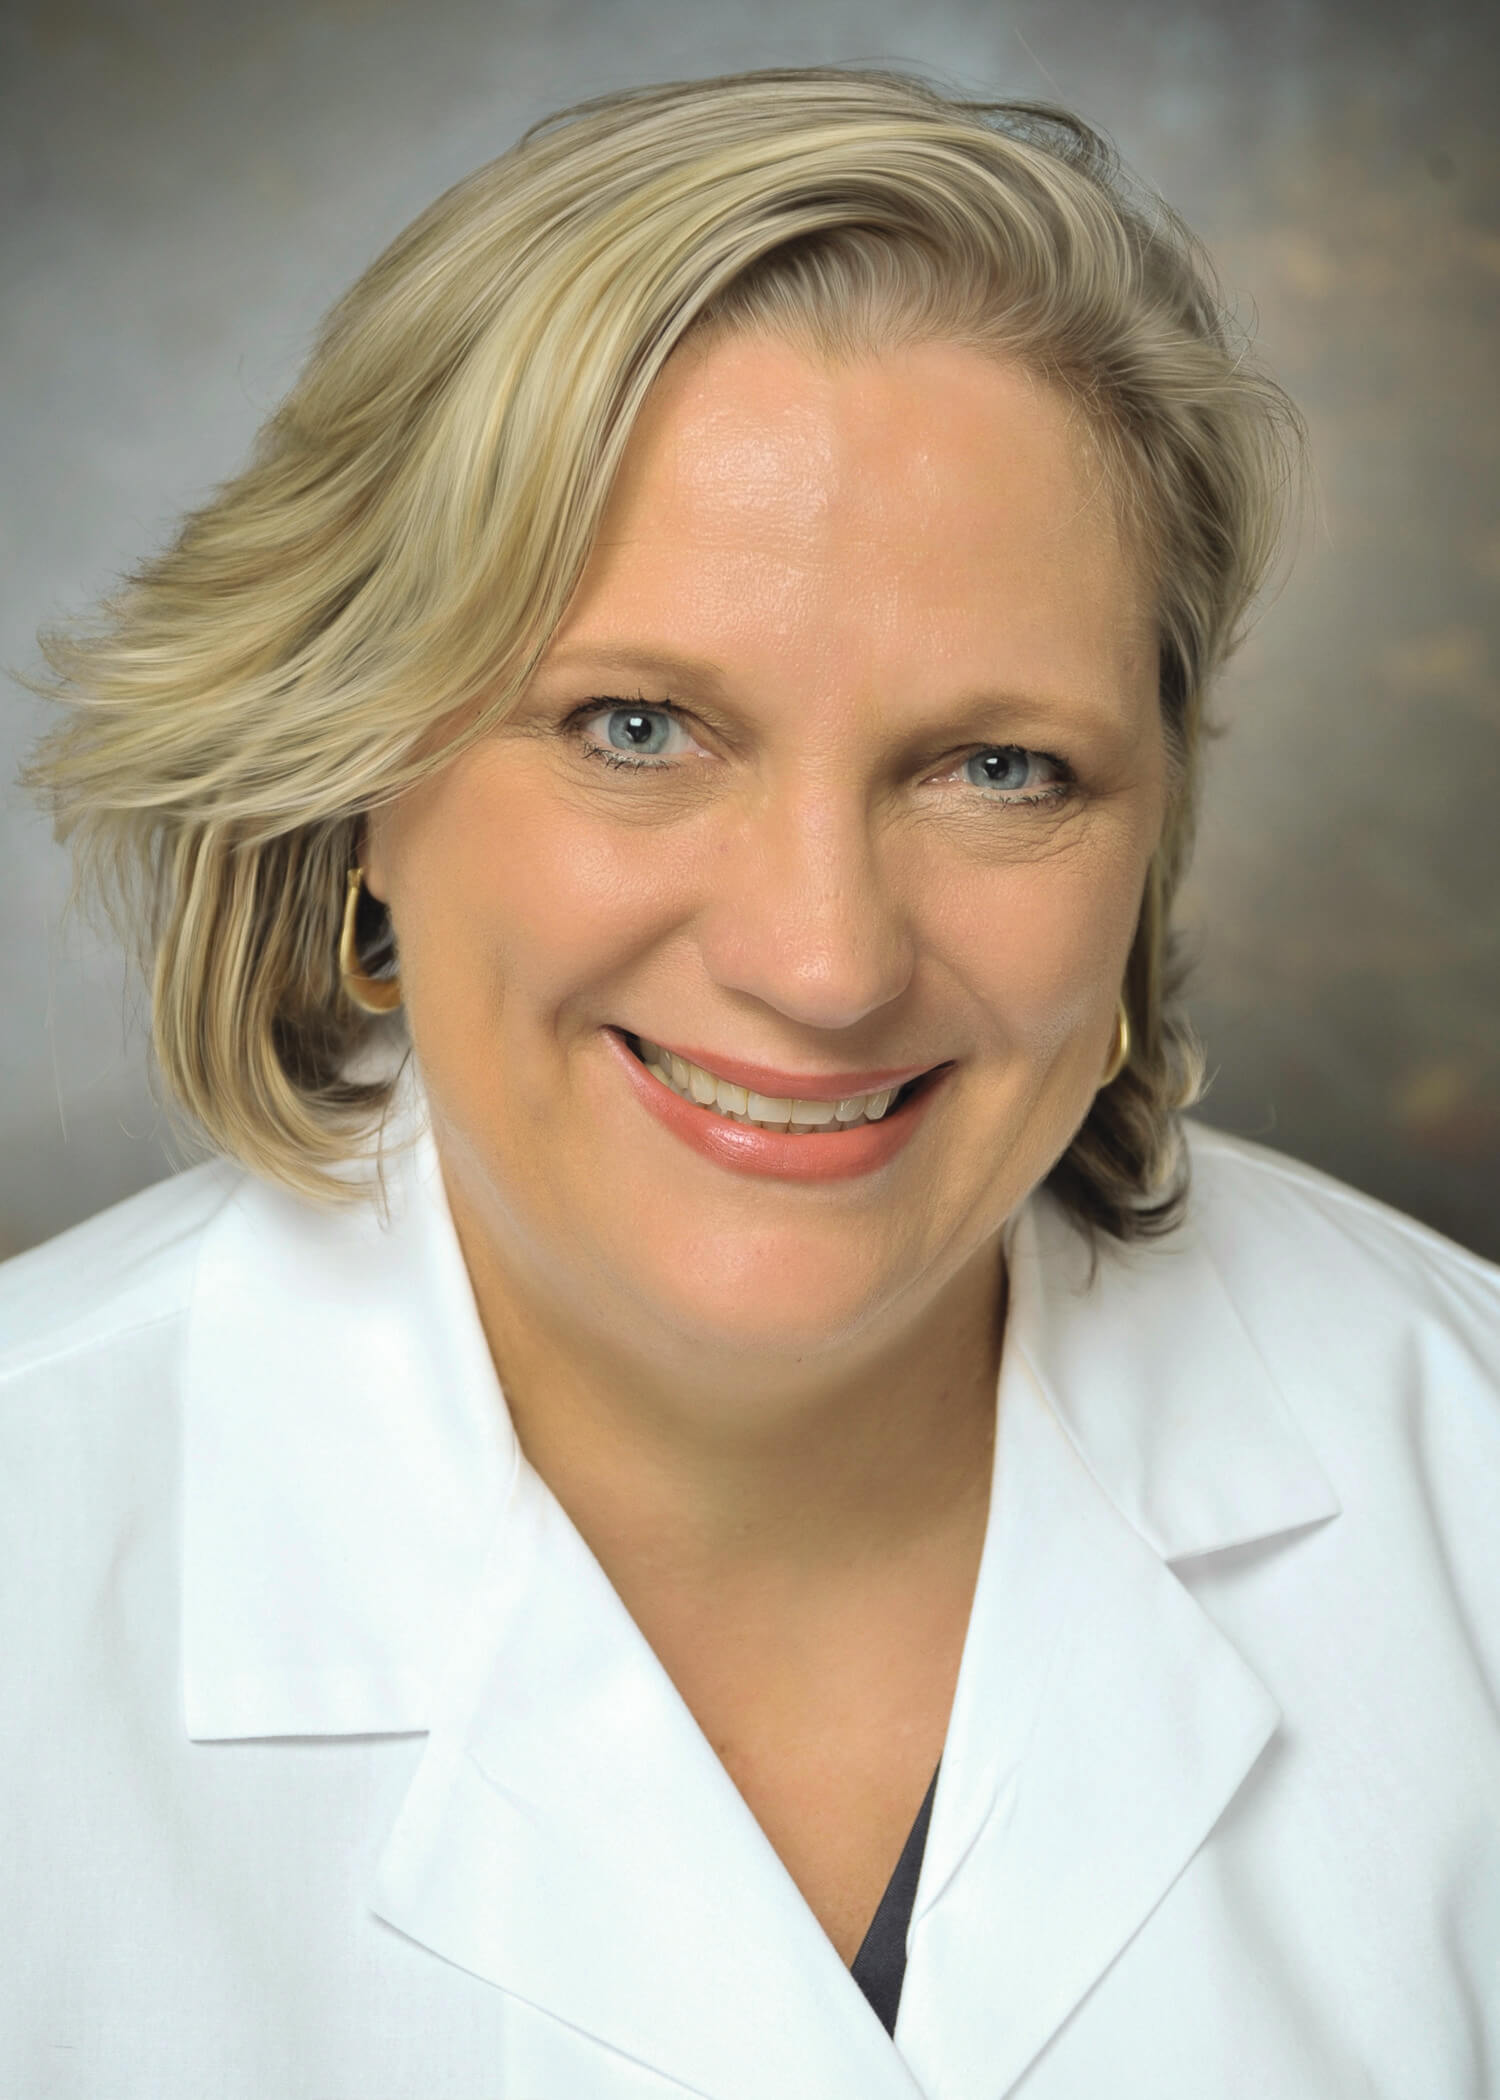 Eloise Catrett, A.P.R.N., R.N., M.S.N., A.C.N.P.-B.C.
Center for Advanced Clinical Practice